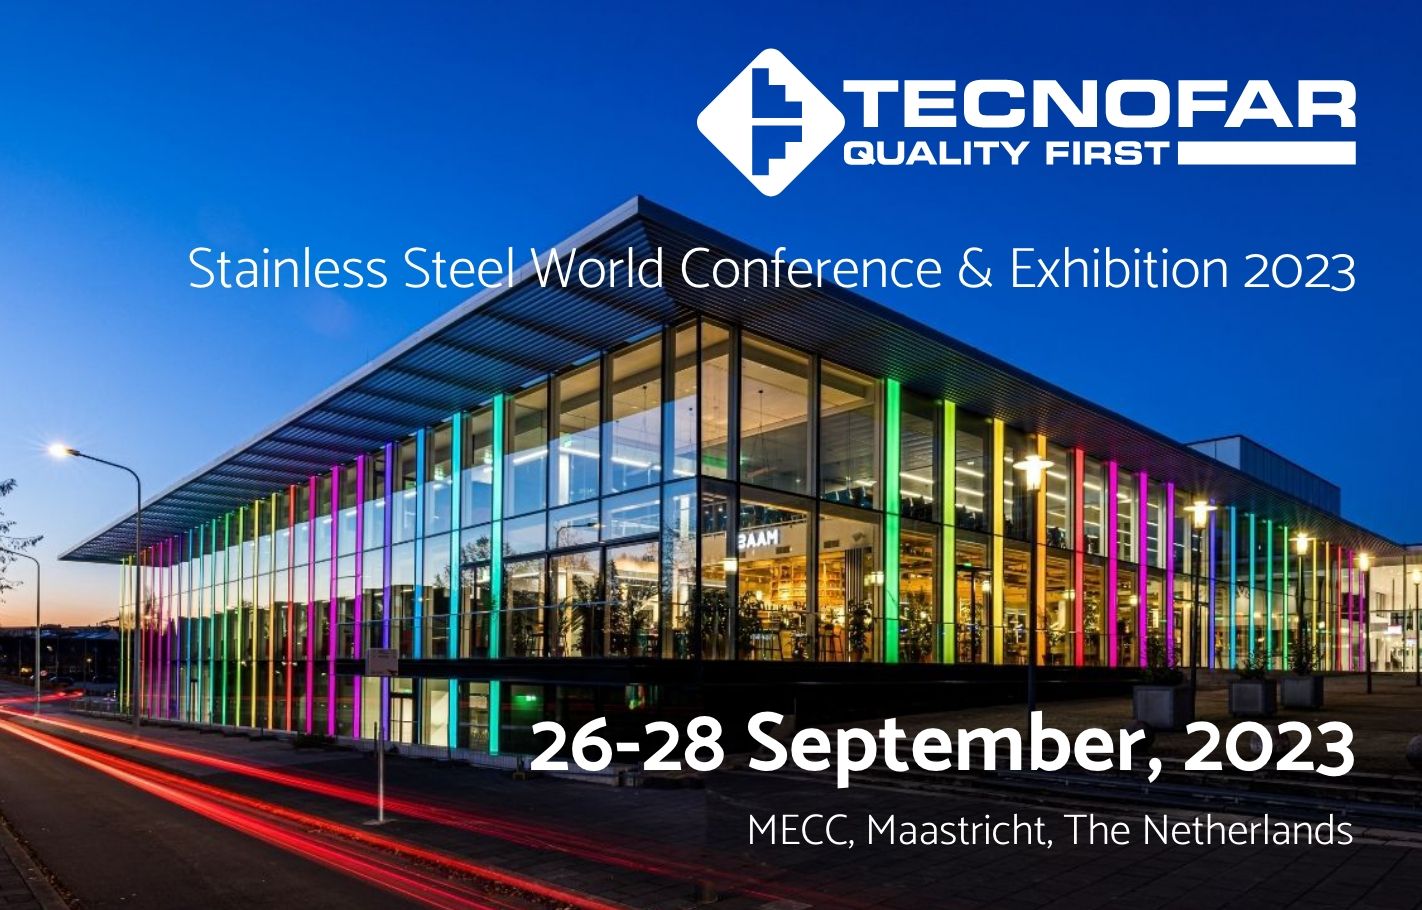 Tecnofar go to Stainless Steel World Conference & Exhibition 2023